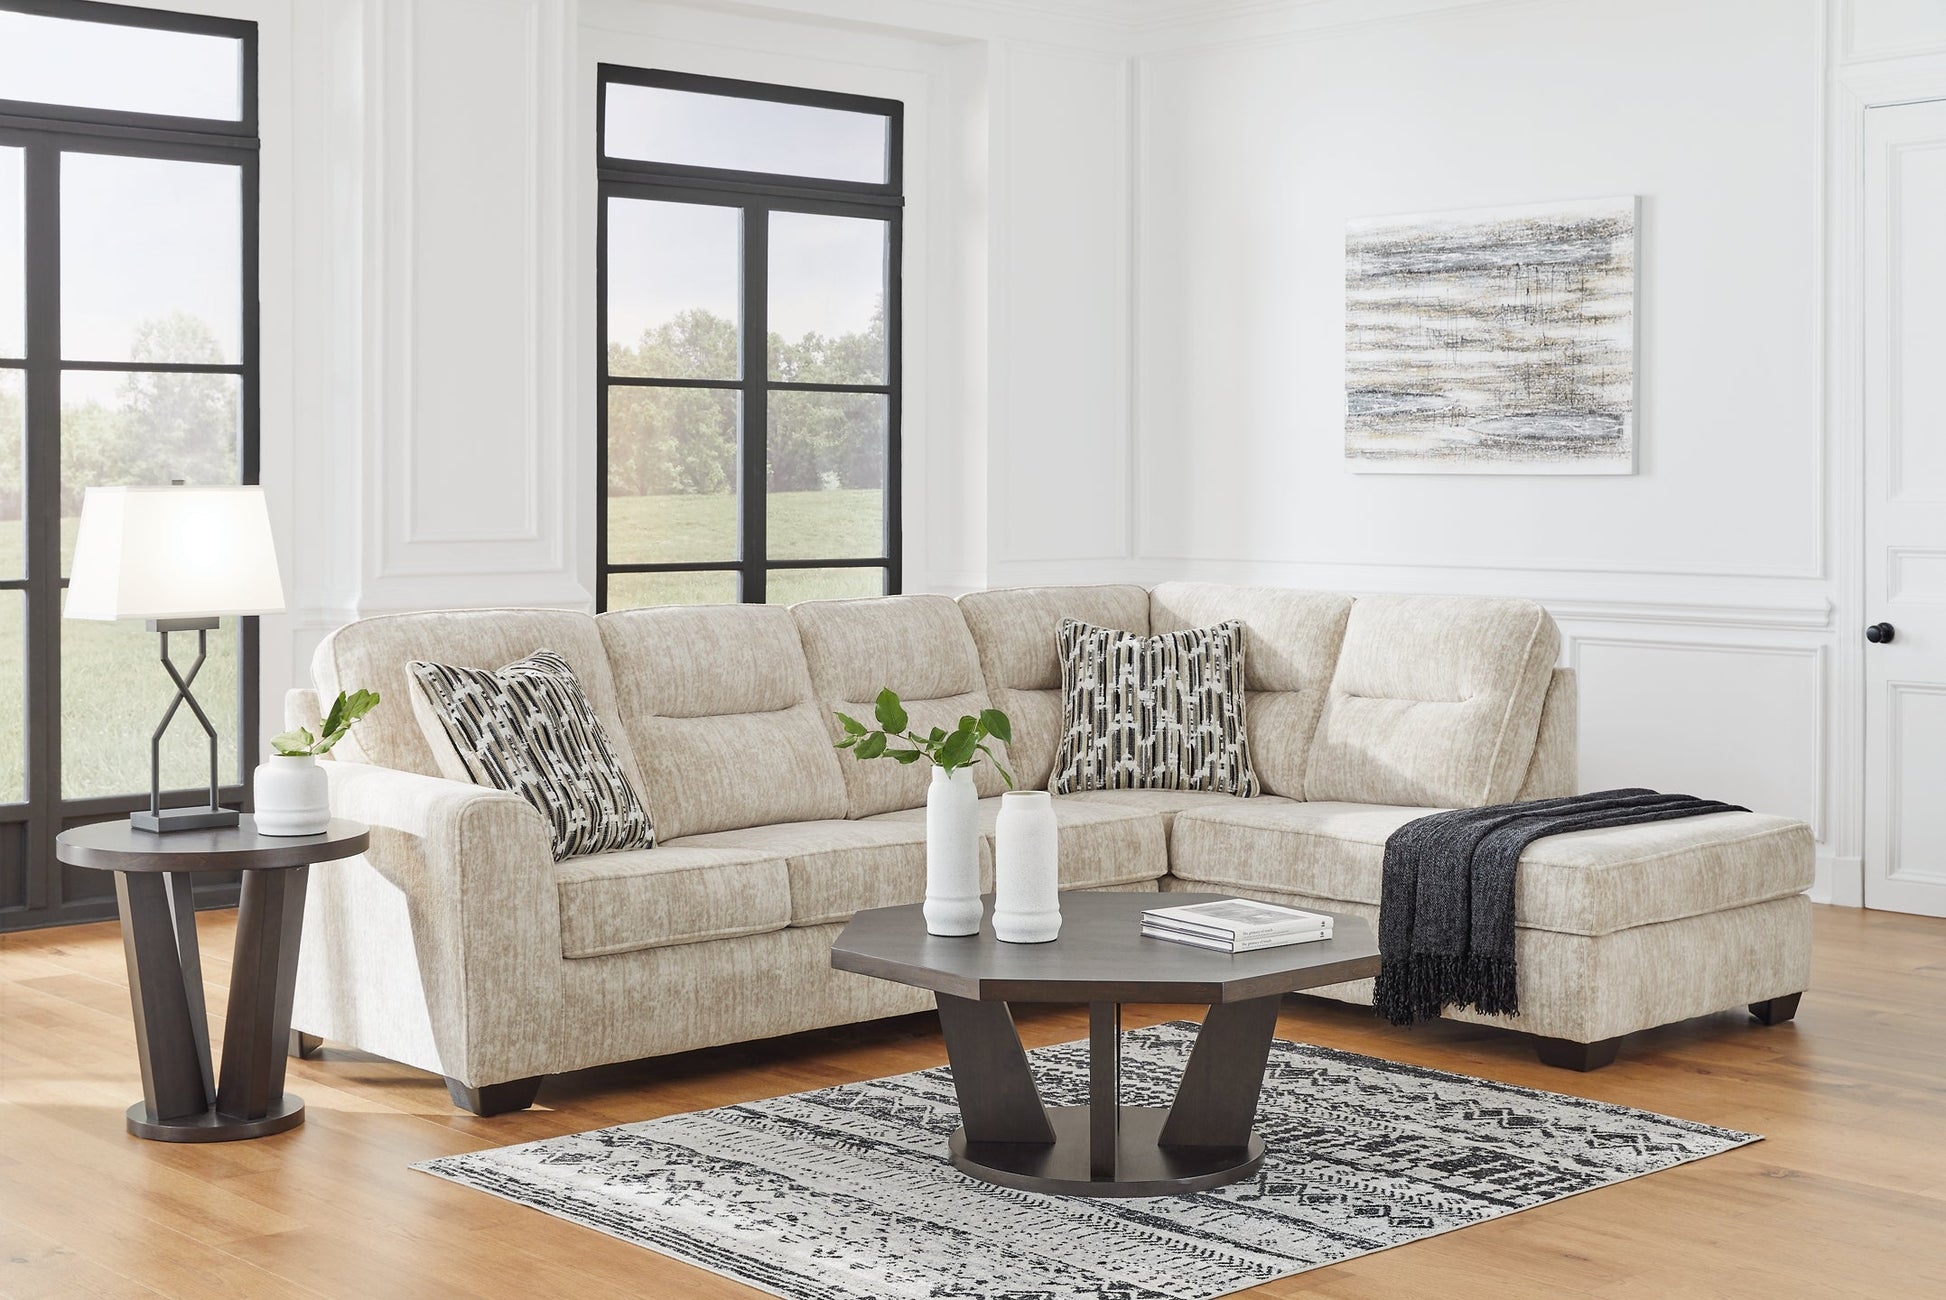 Lonoke 2-Piece Sectional with Chaise at Cloud 9 Mattress & Furniture furniture, home furnishing, home decor